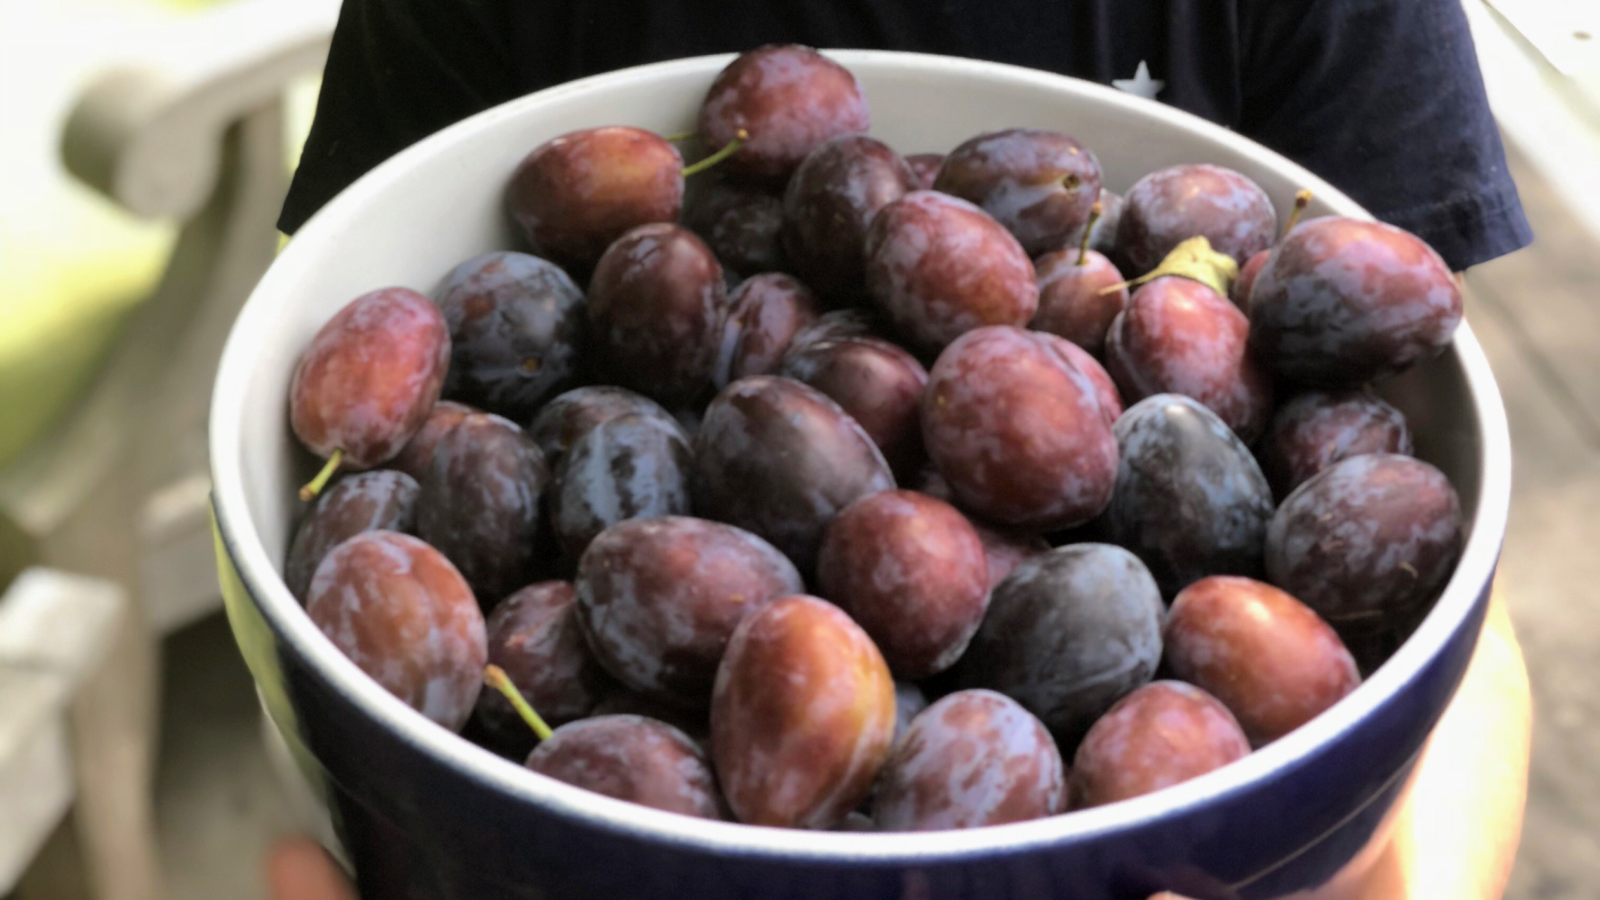 A bowl full of ripe plums